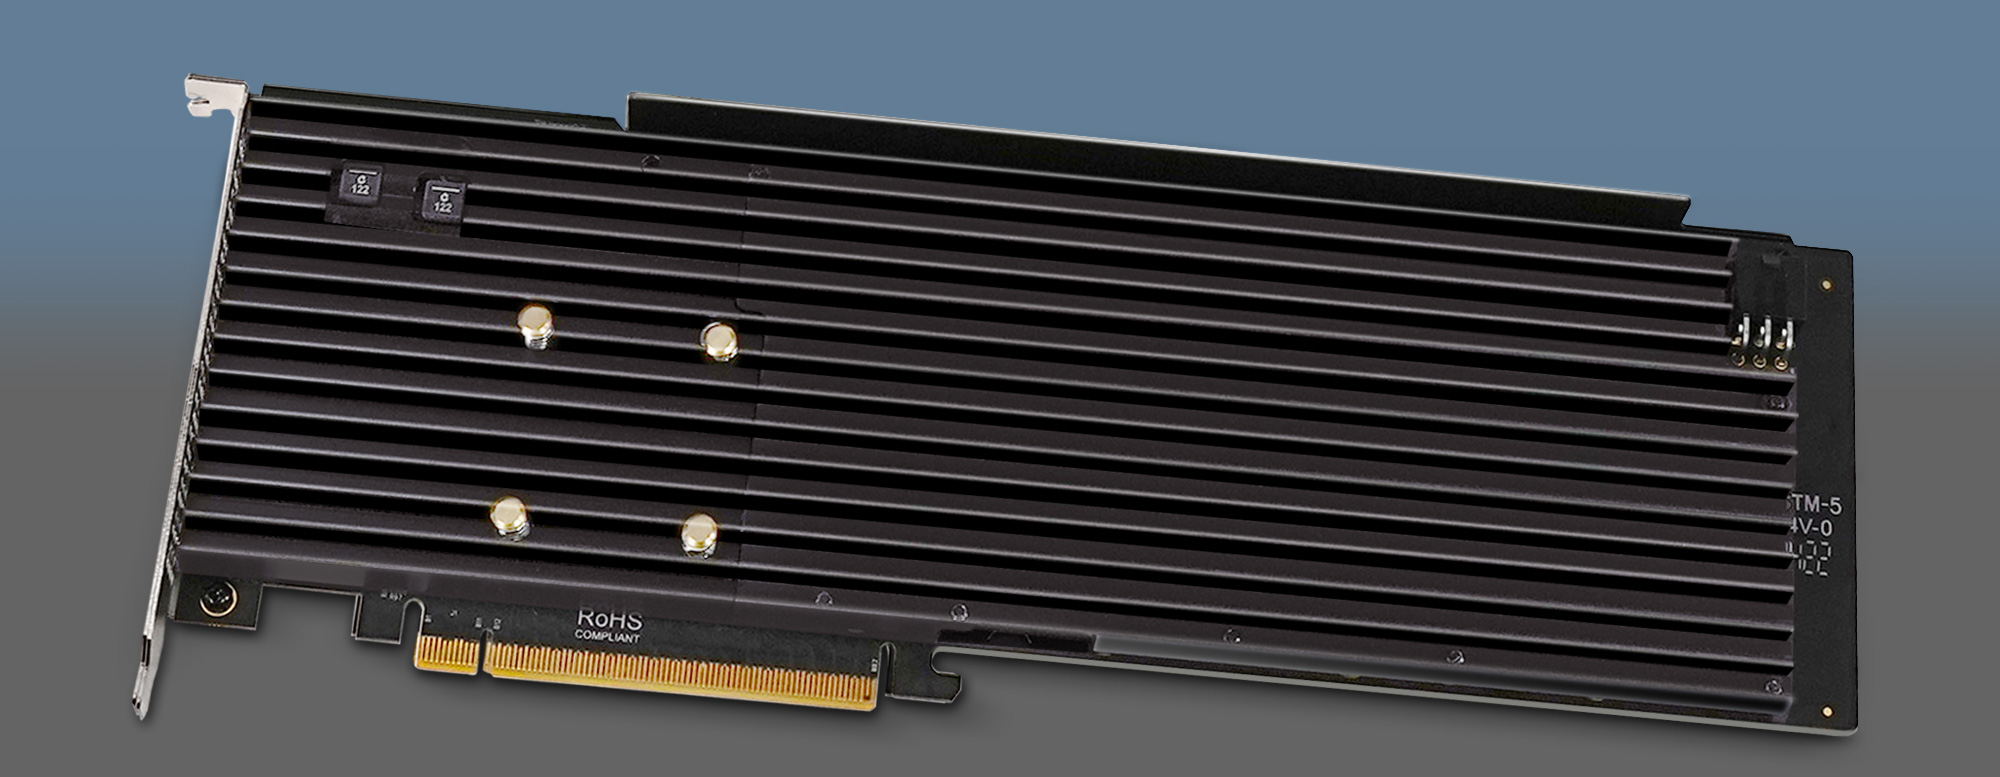 Overhead View of Sonnet M.2 2x4 PCIe Card Along with Included Low-profile Bracket